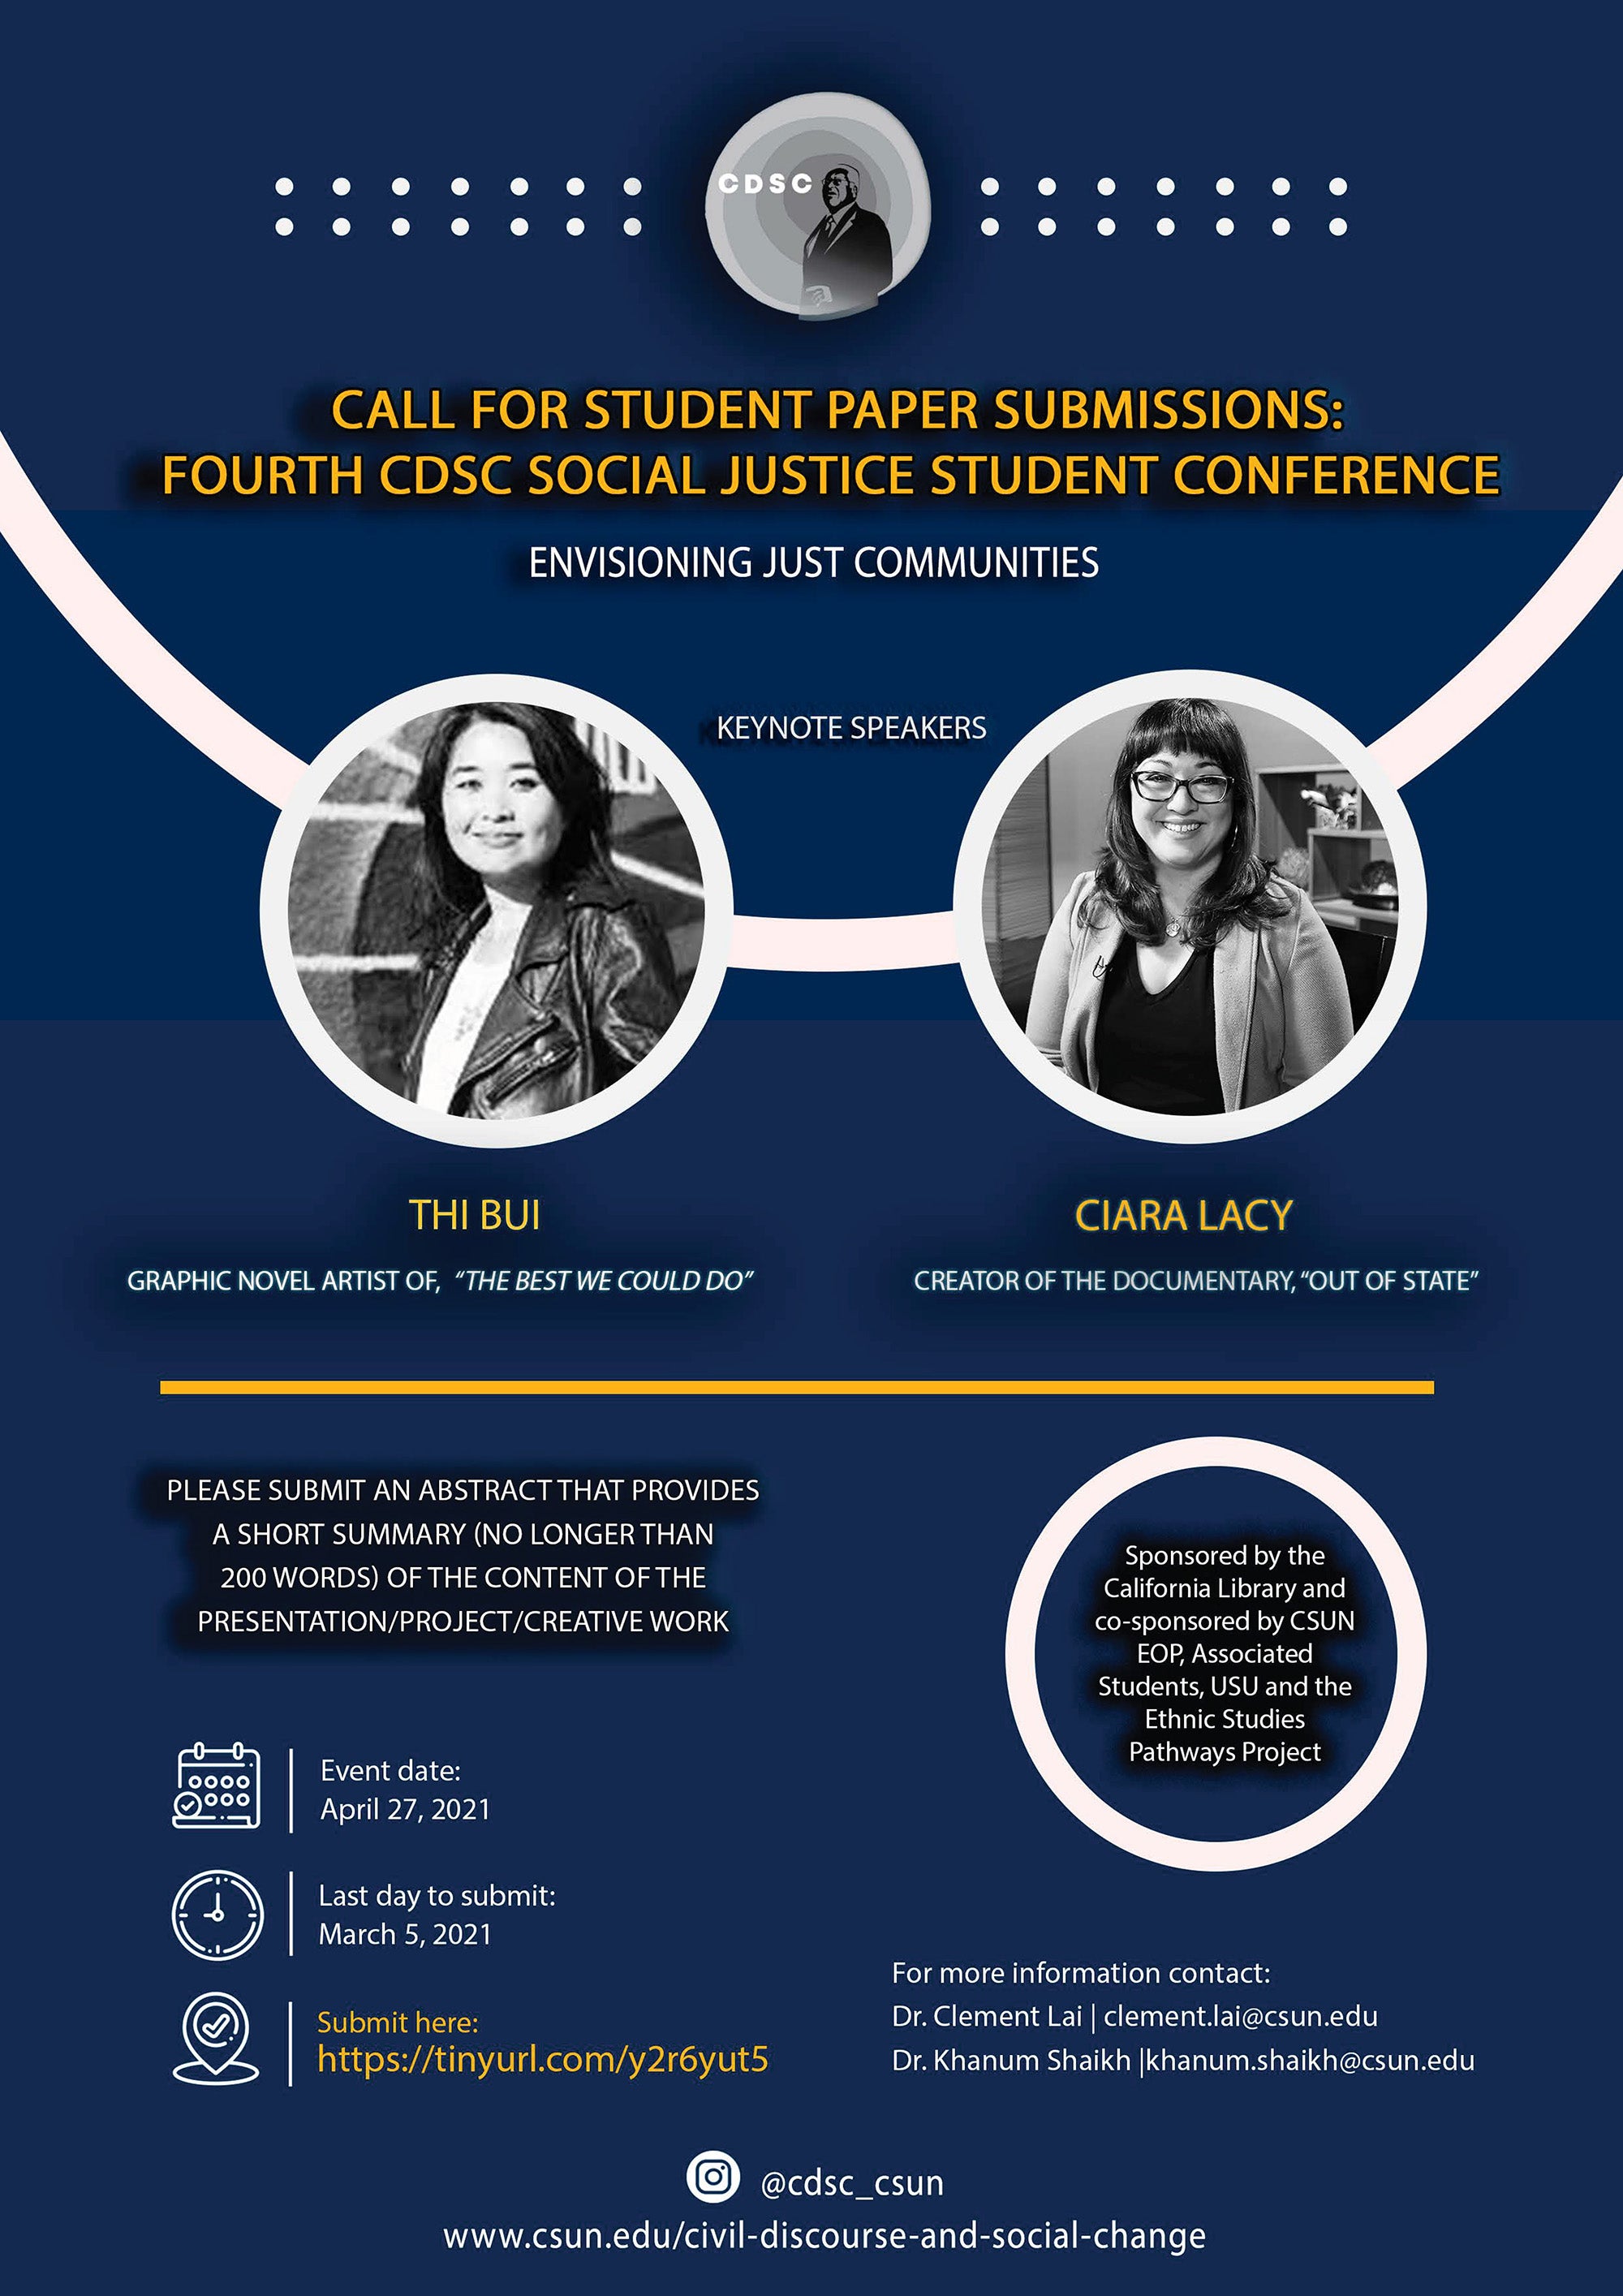 Call for Student Paper Submissions:Fourth CDSC Social Justice Student Conference